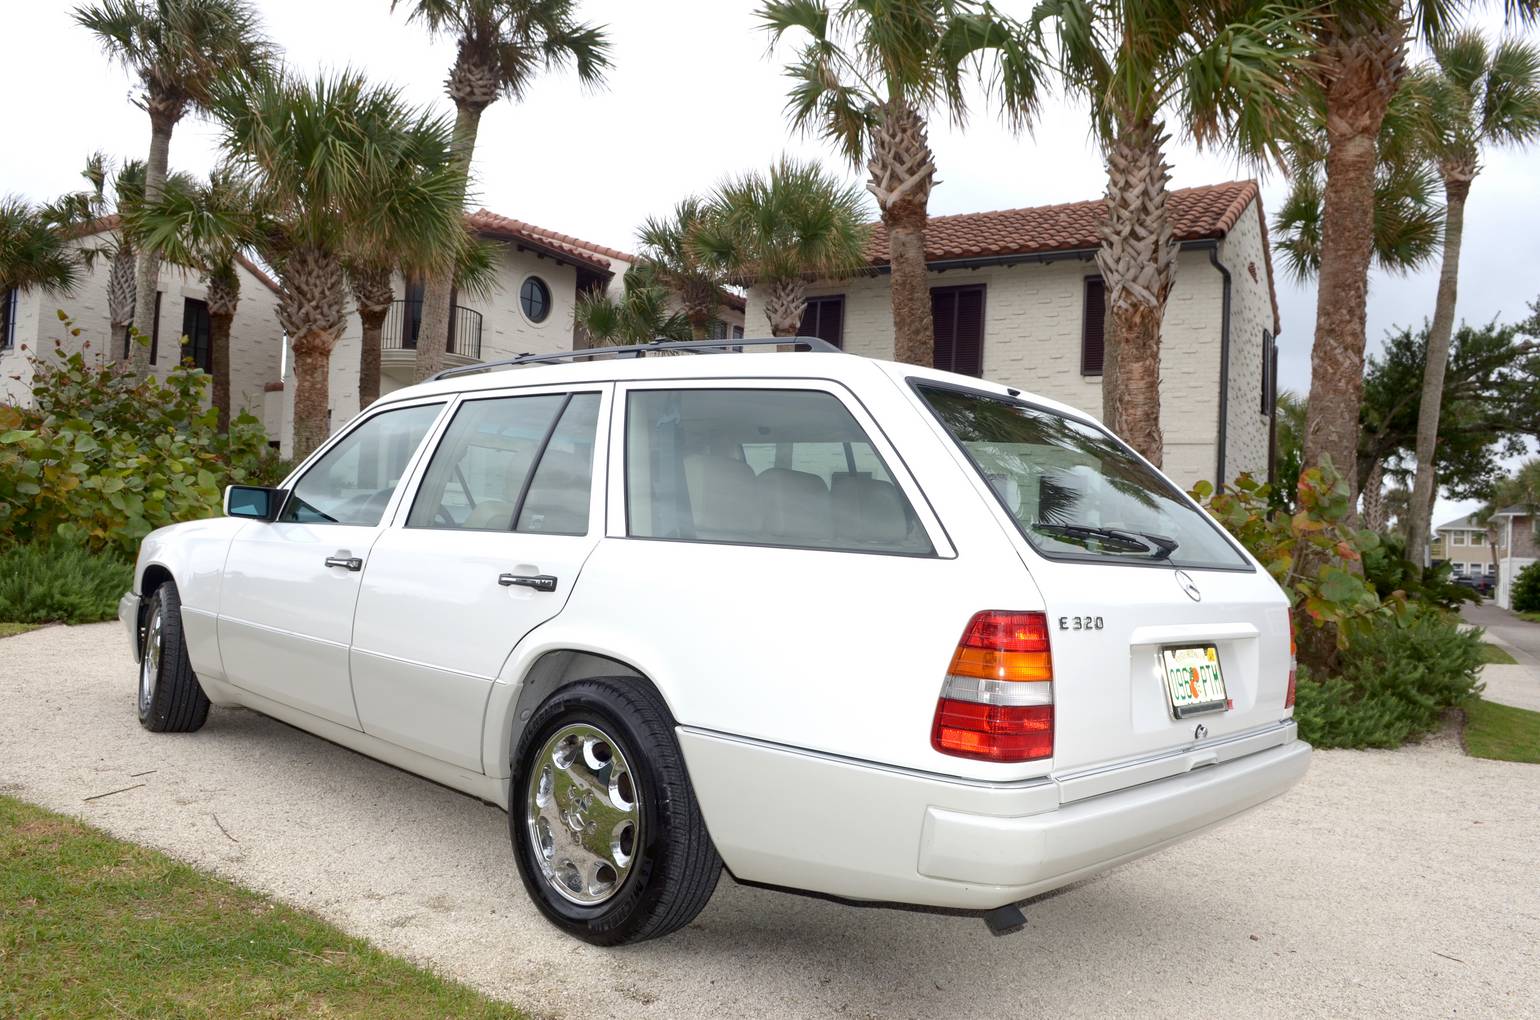 built-to-a-standard-not-to-a-price-32k-mile-1995-mercedes-benz-e320-estate77959121-770-0@2X